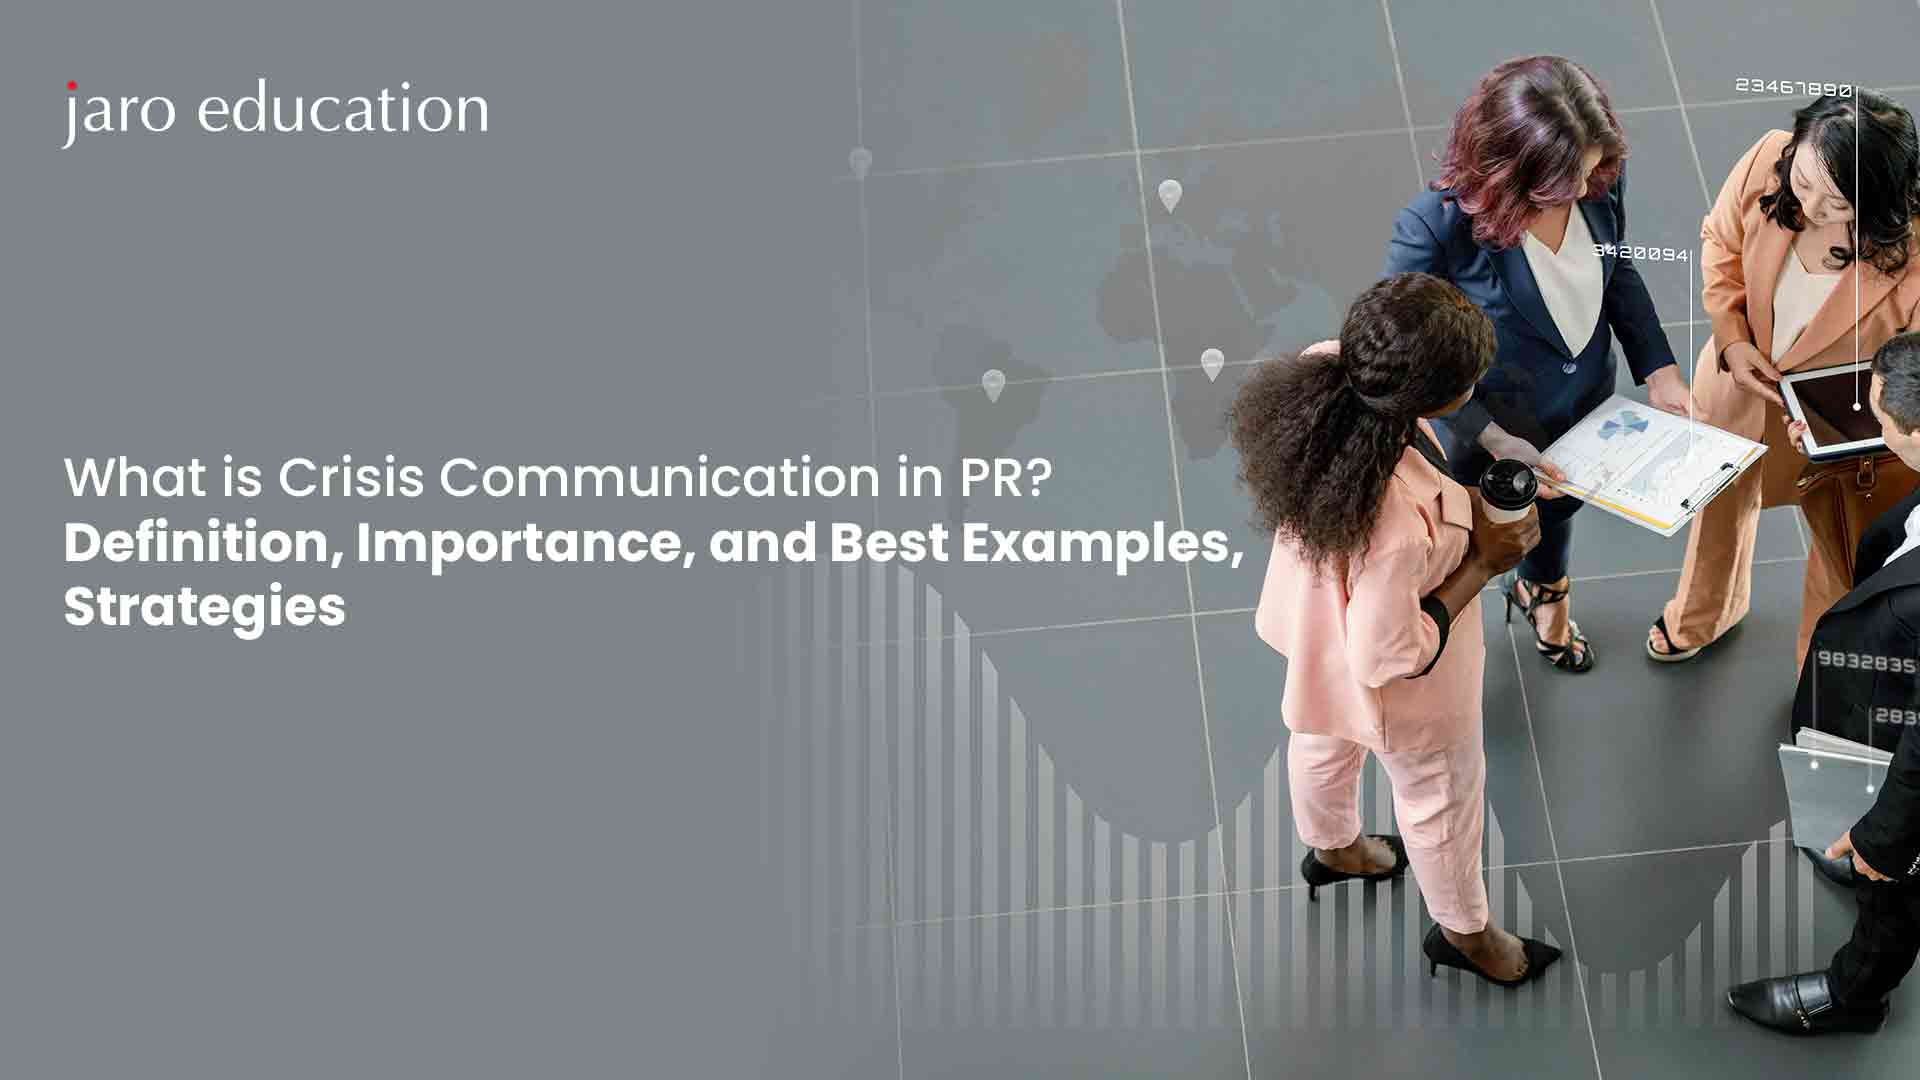 What is Crisis Communication in PR Definition, Importance, and Best Examples, Strategies